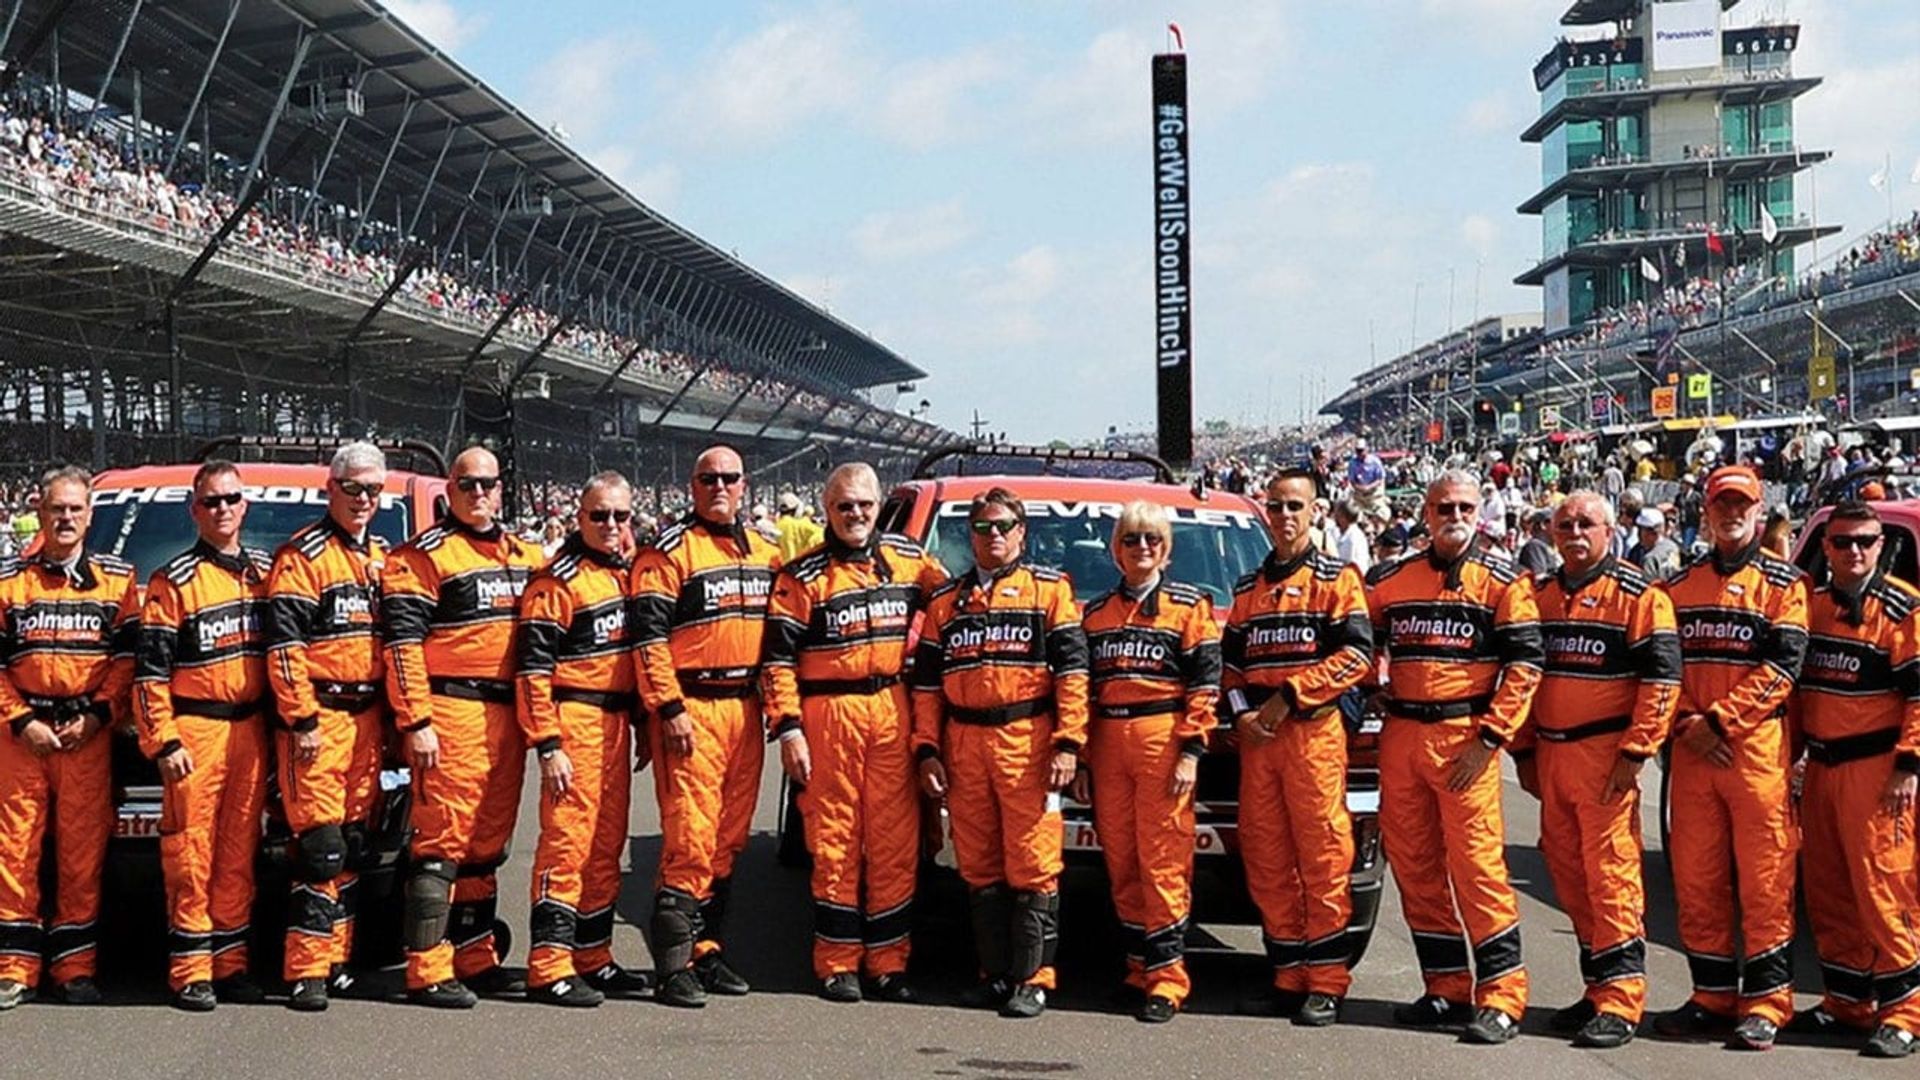 Yellow Yellow Yellow: The Indycar Safety Team Backdrop